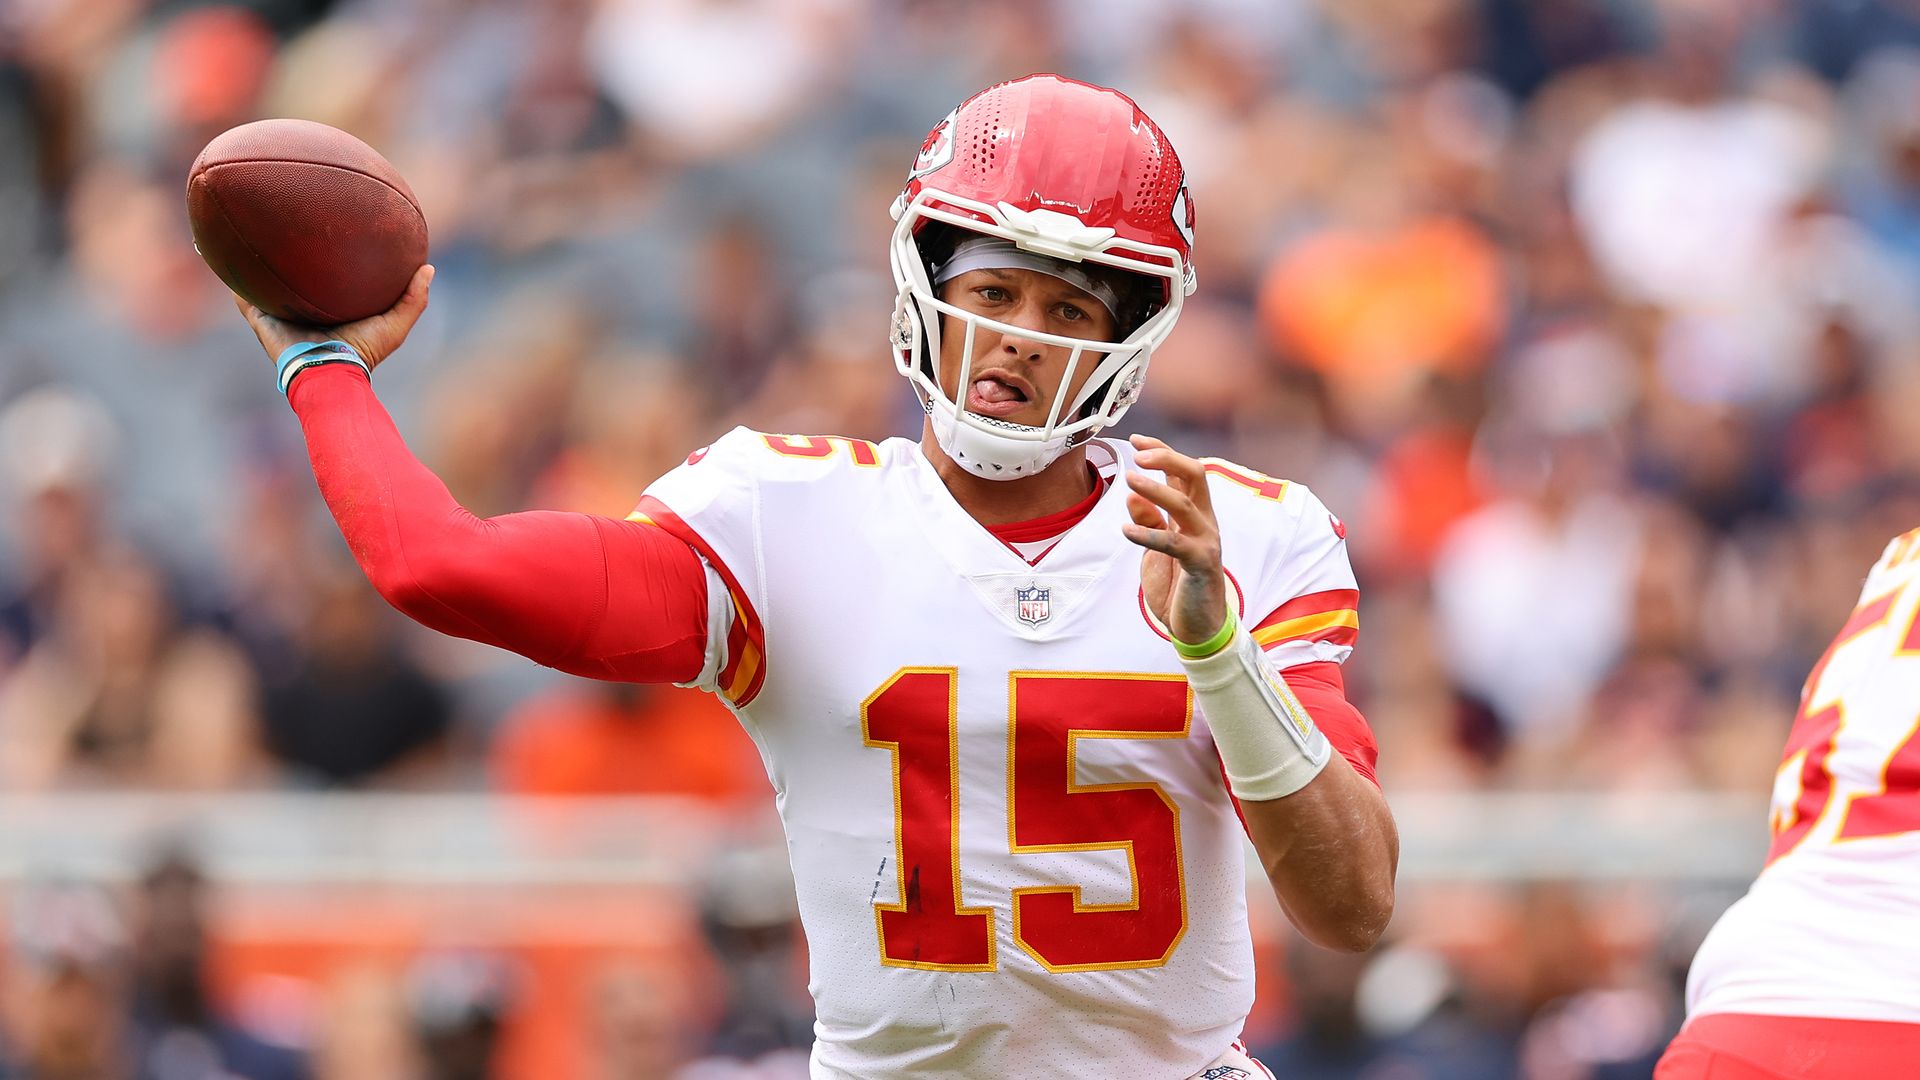 Patrick Mahomes passing the football in an NFL game